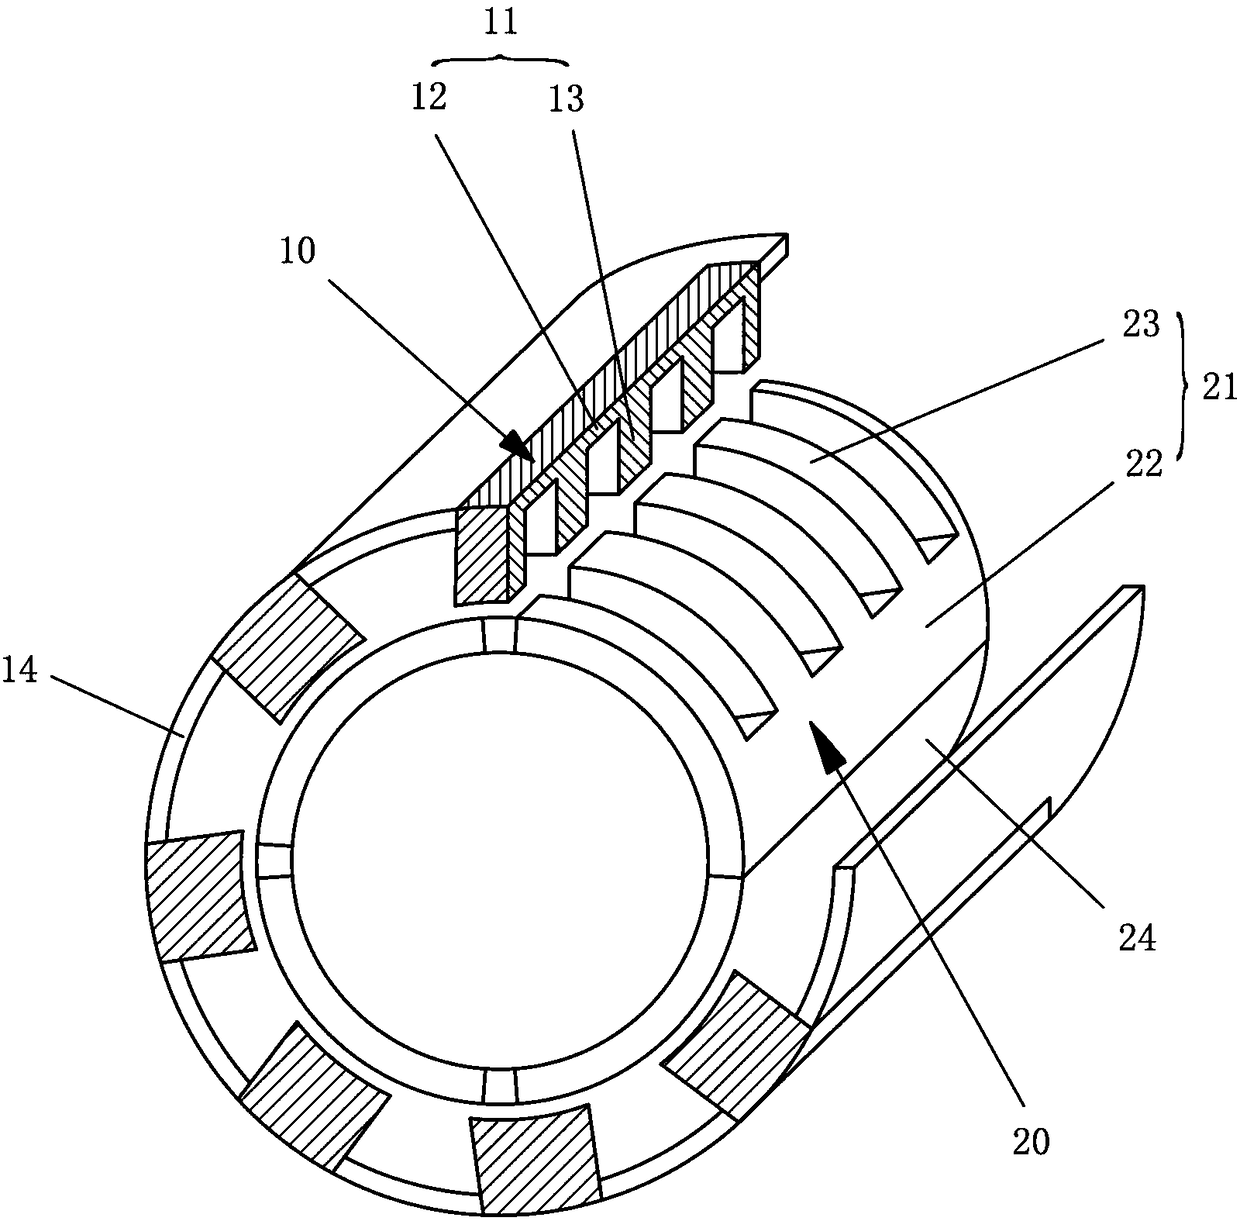 Switched reluctance motor including U-shaped rotor magnetic pole structure